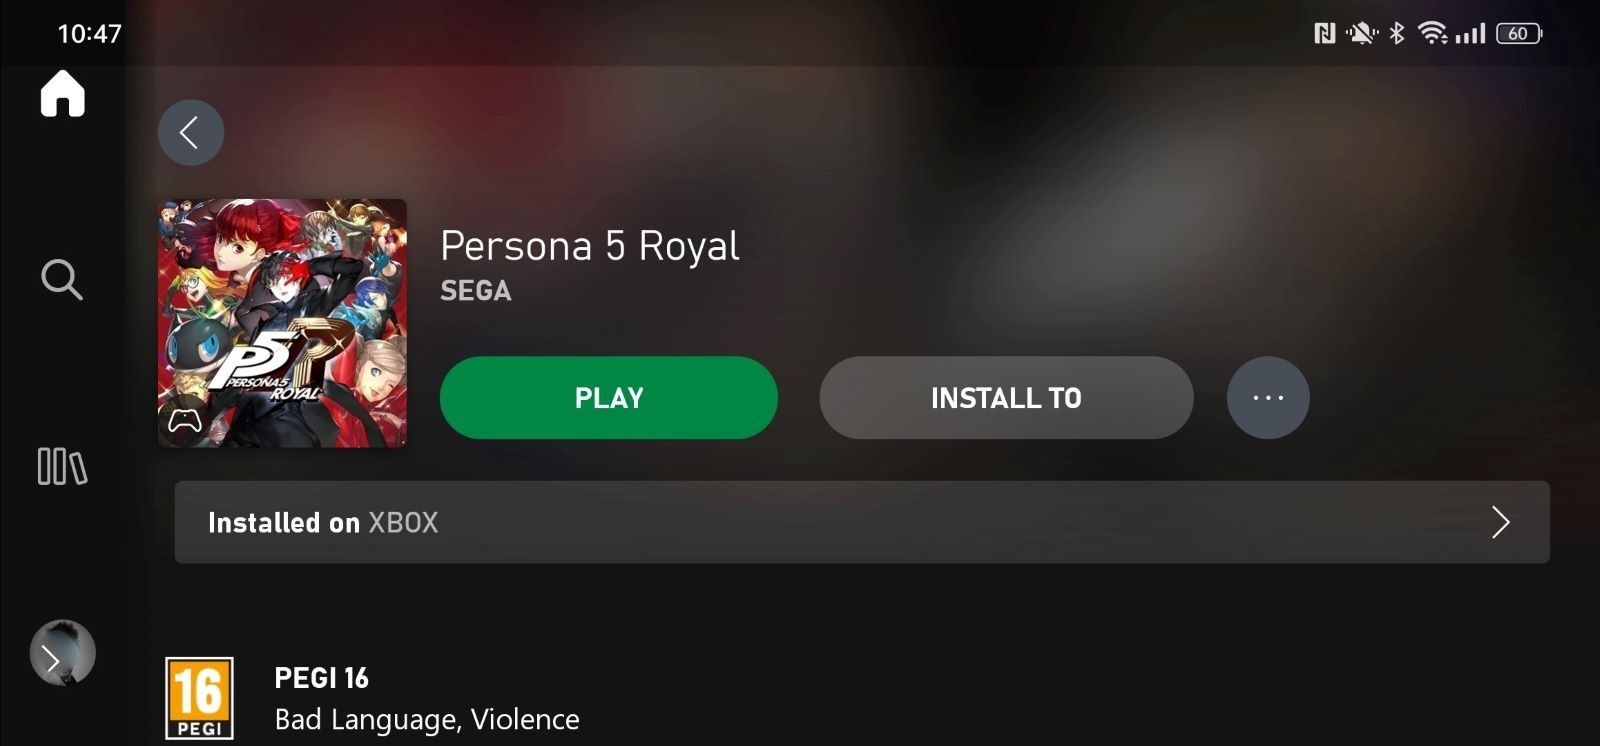 A screenshot of Persona 5 Royal on the Xbox Game Pass service with Play highlighted 